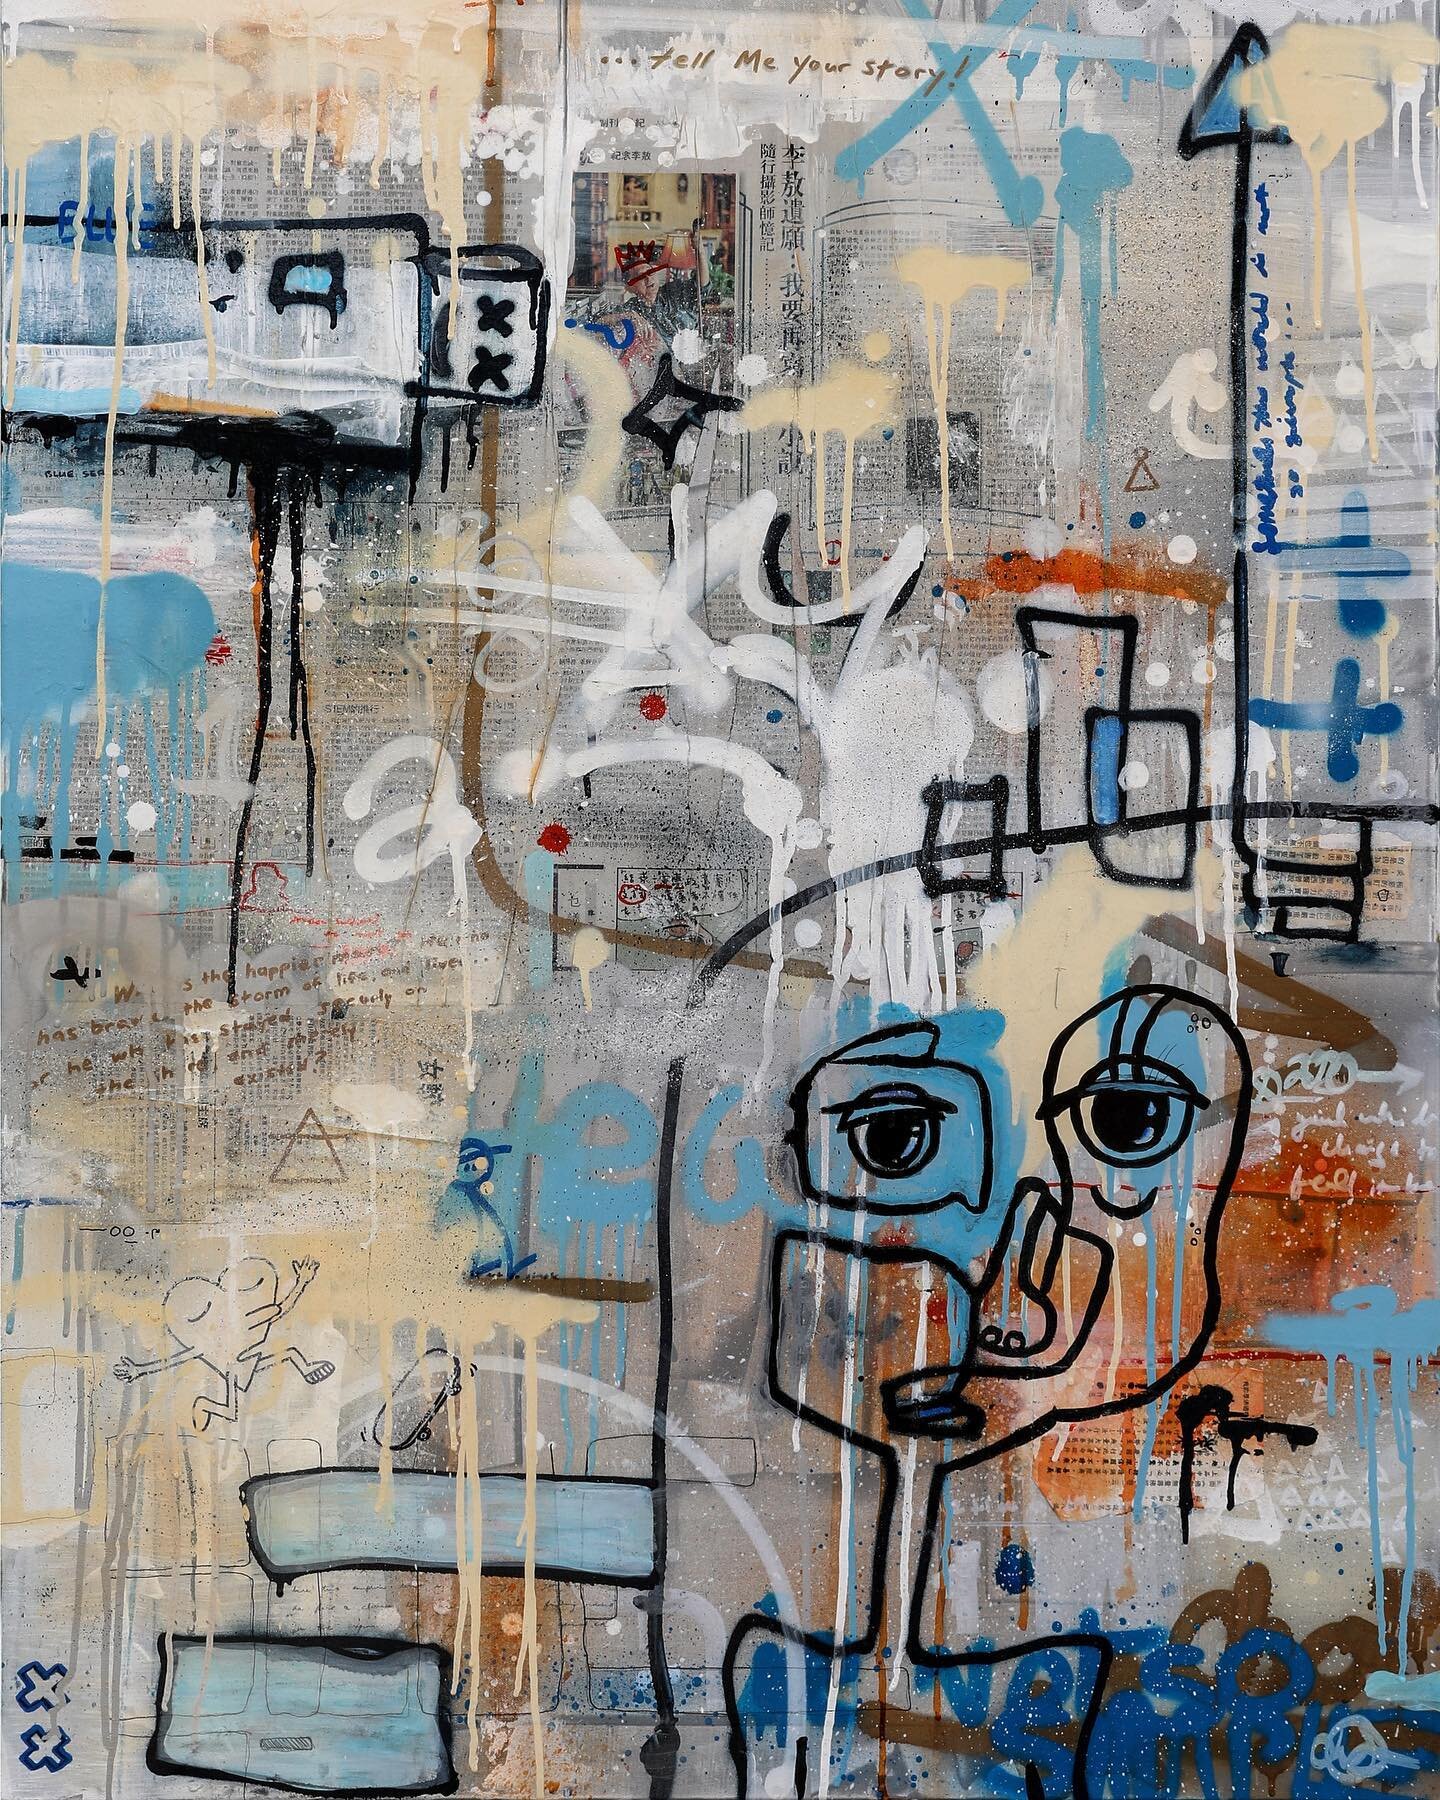 &ldquo;Sometimes the World
is not so Simple, #2&rdquo;
-The Blue Series-

48x36
Acrylic/ink/paper/mixed media,
On 1.5&rdquo; gallery canvas
SOLD